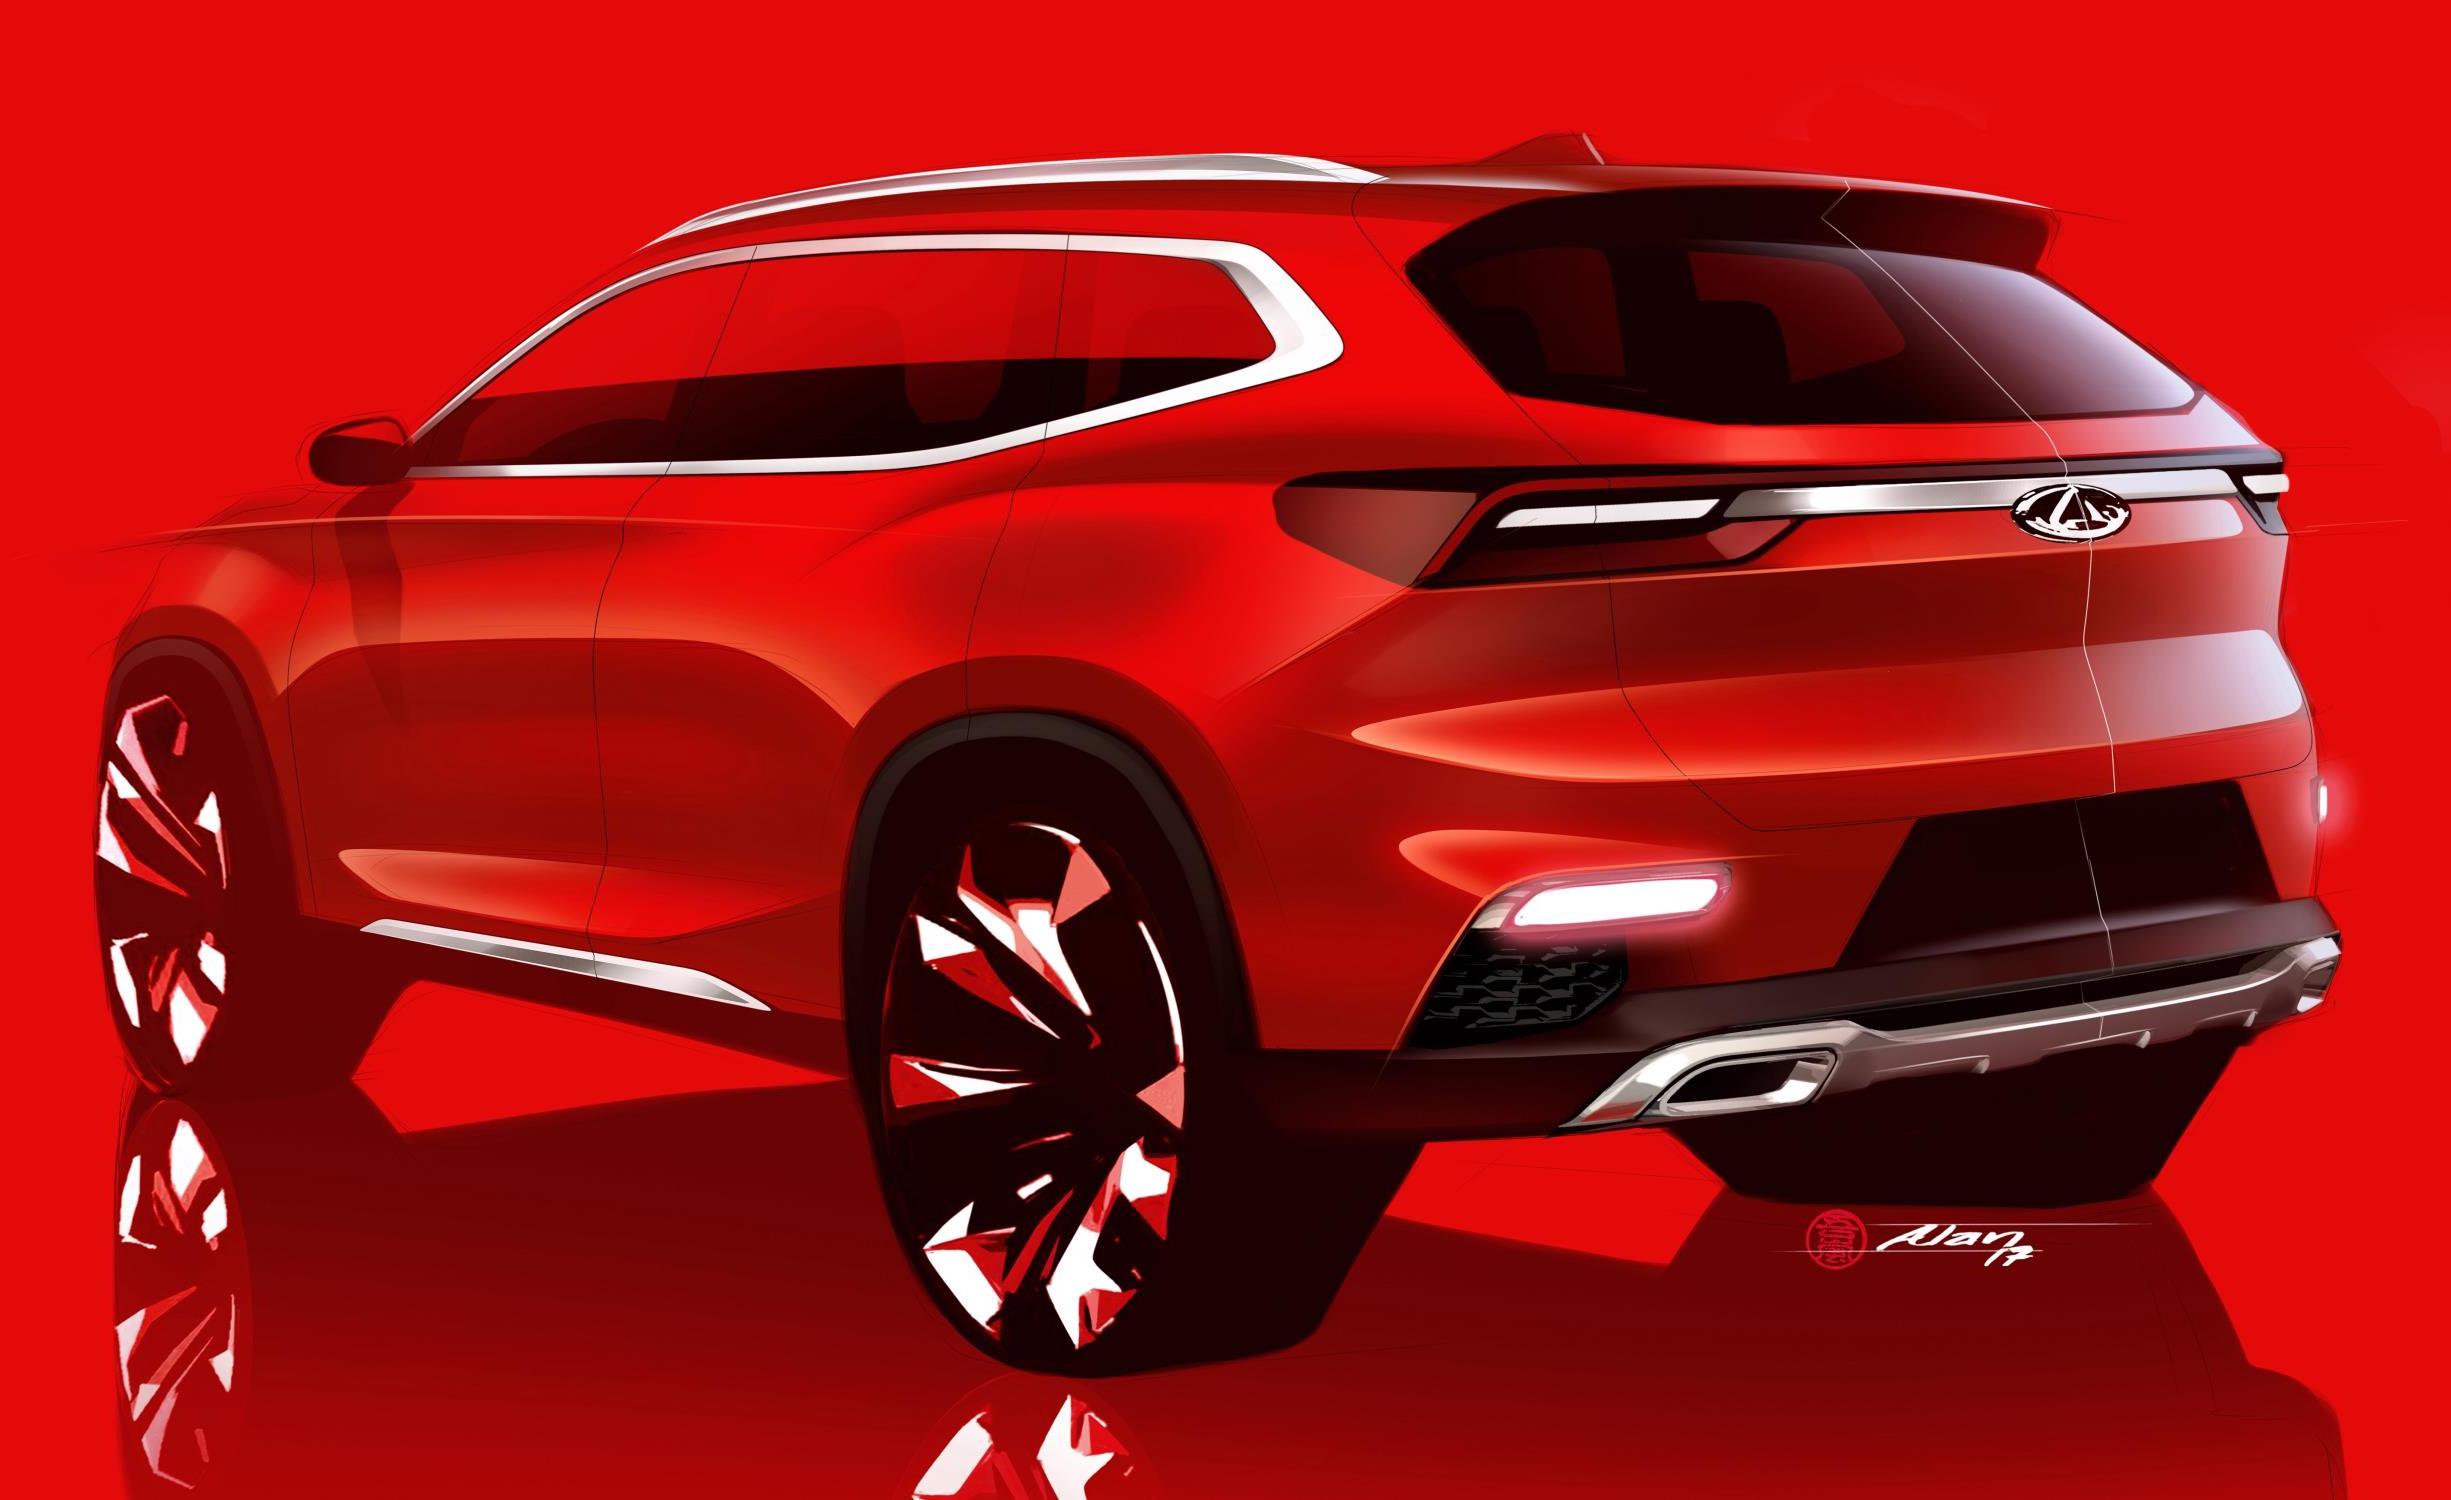 Chery plans electric SUV for Frankfurt, to enter Euro market